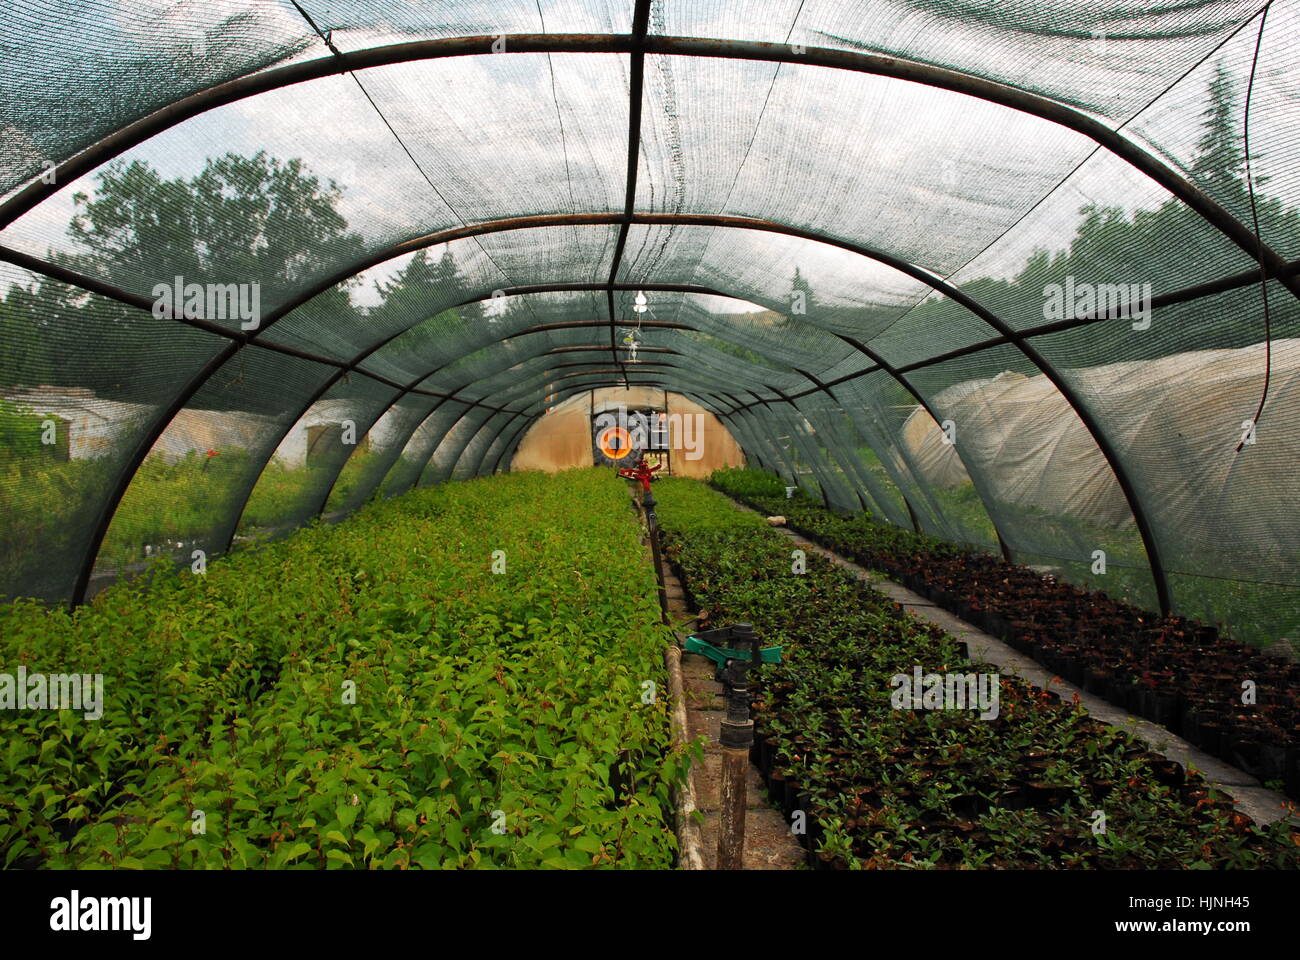 Green House and plants at the rural area Stock Photo